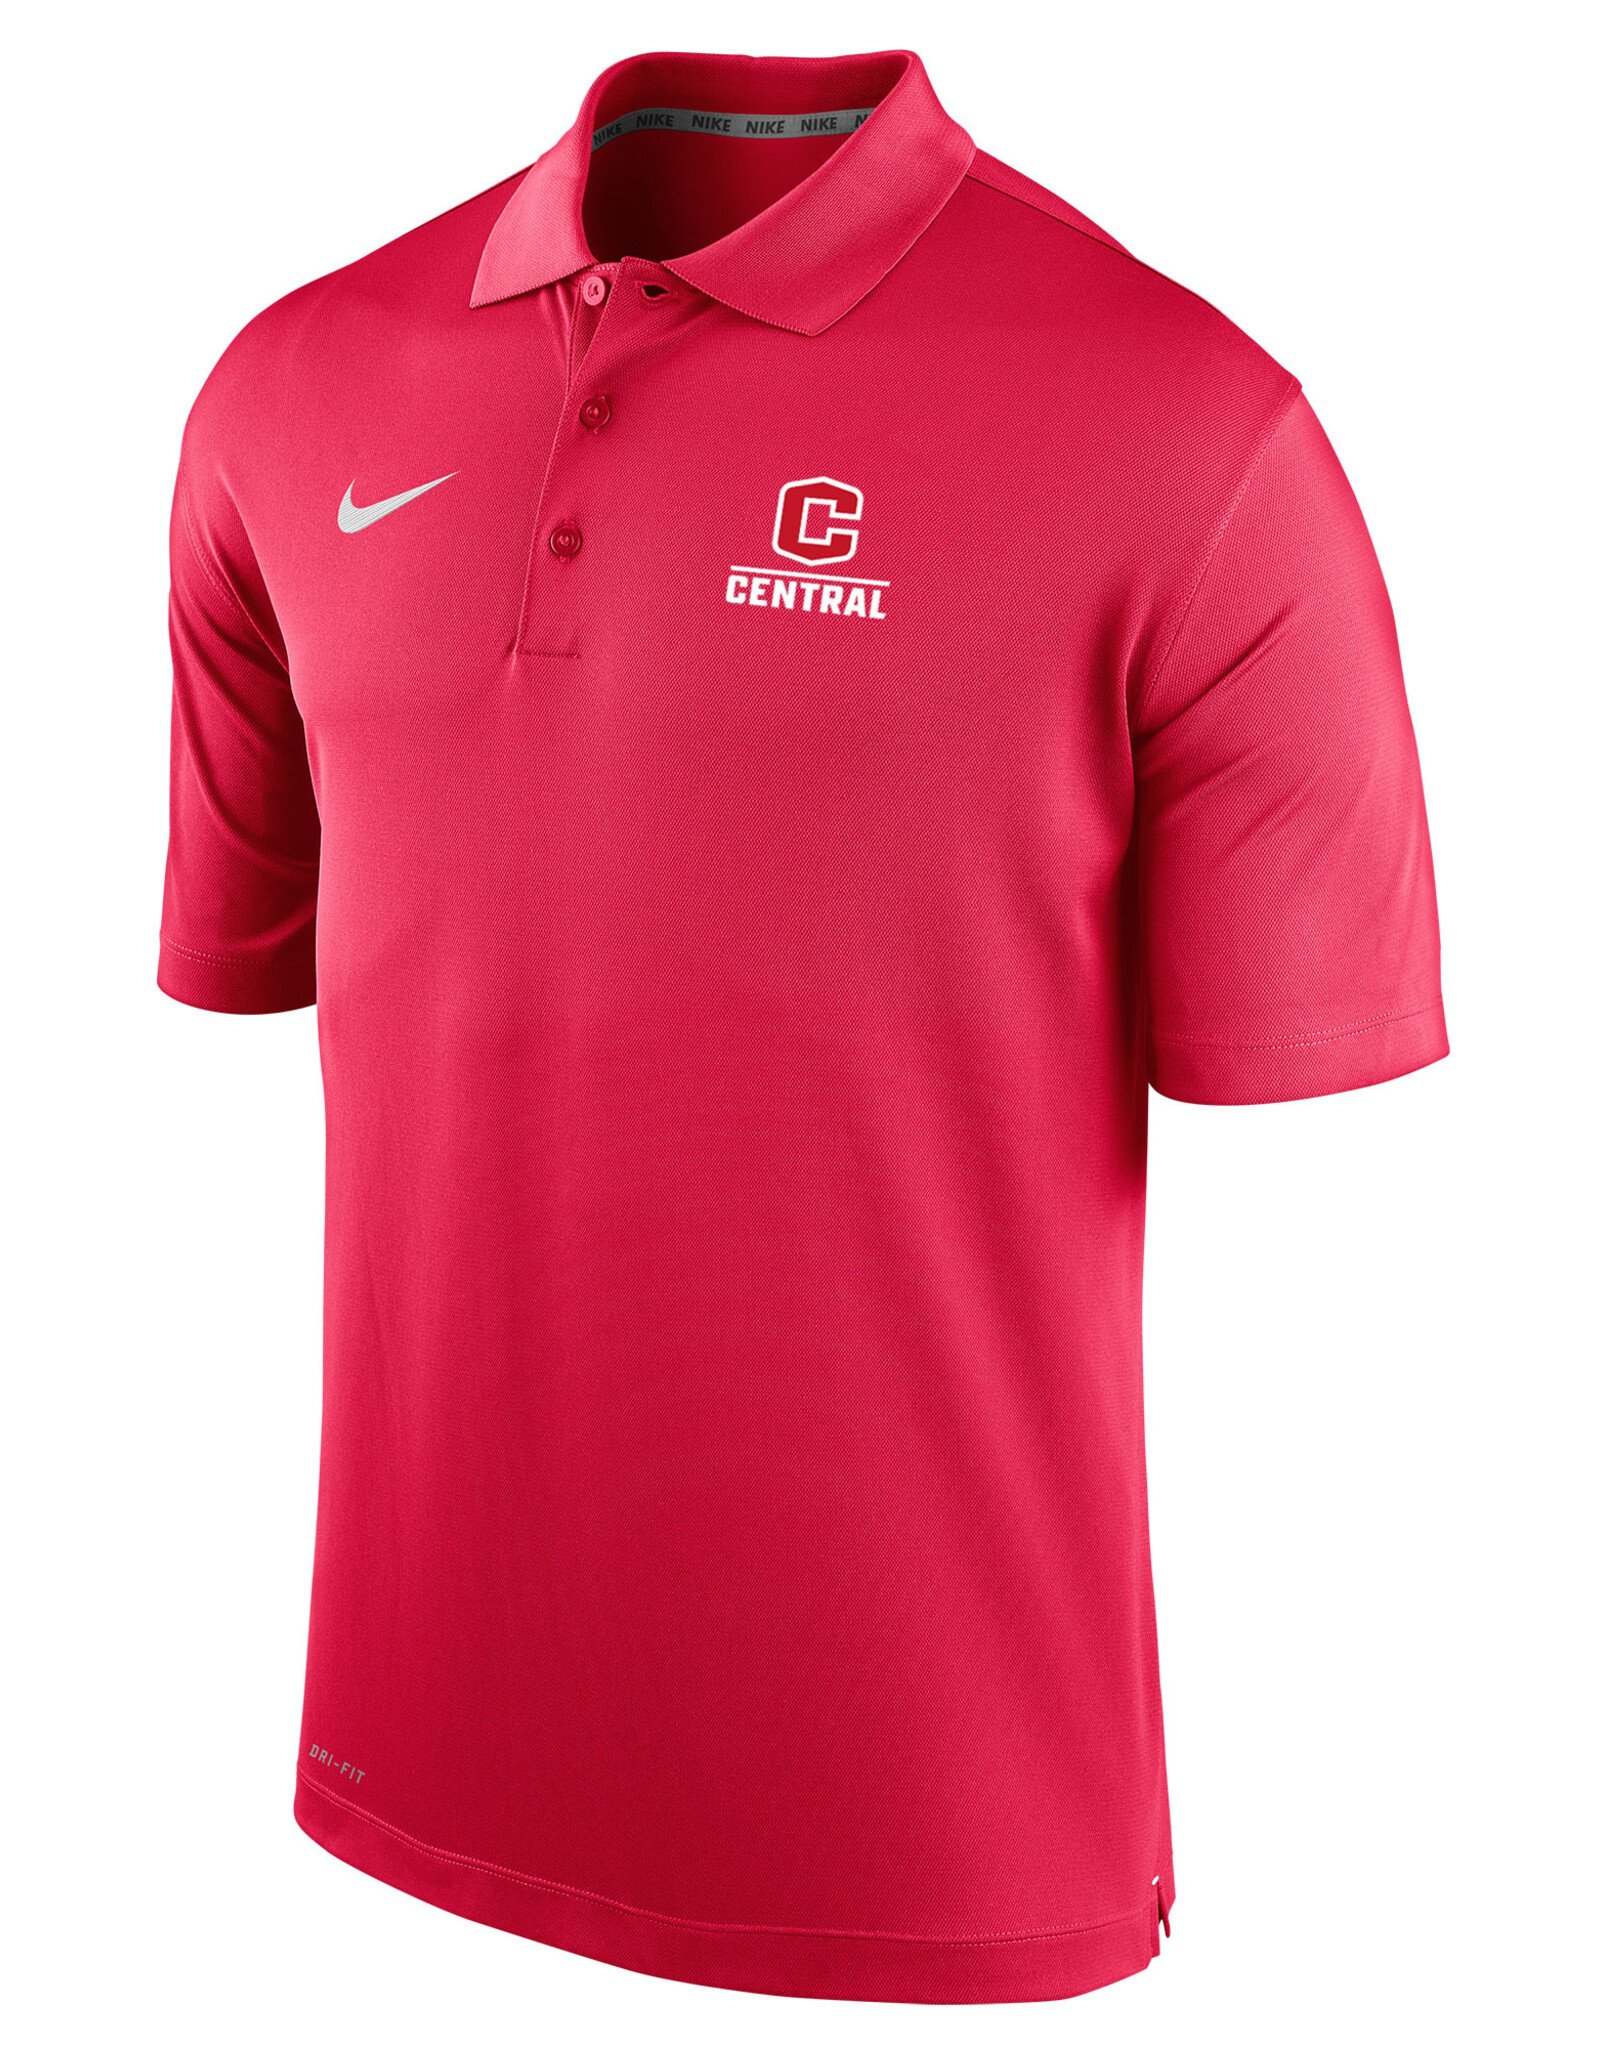 Nike Nike Varsity Polo C Central Red